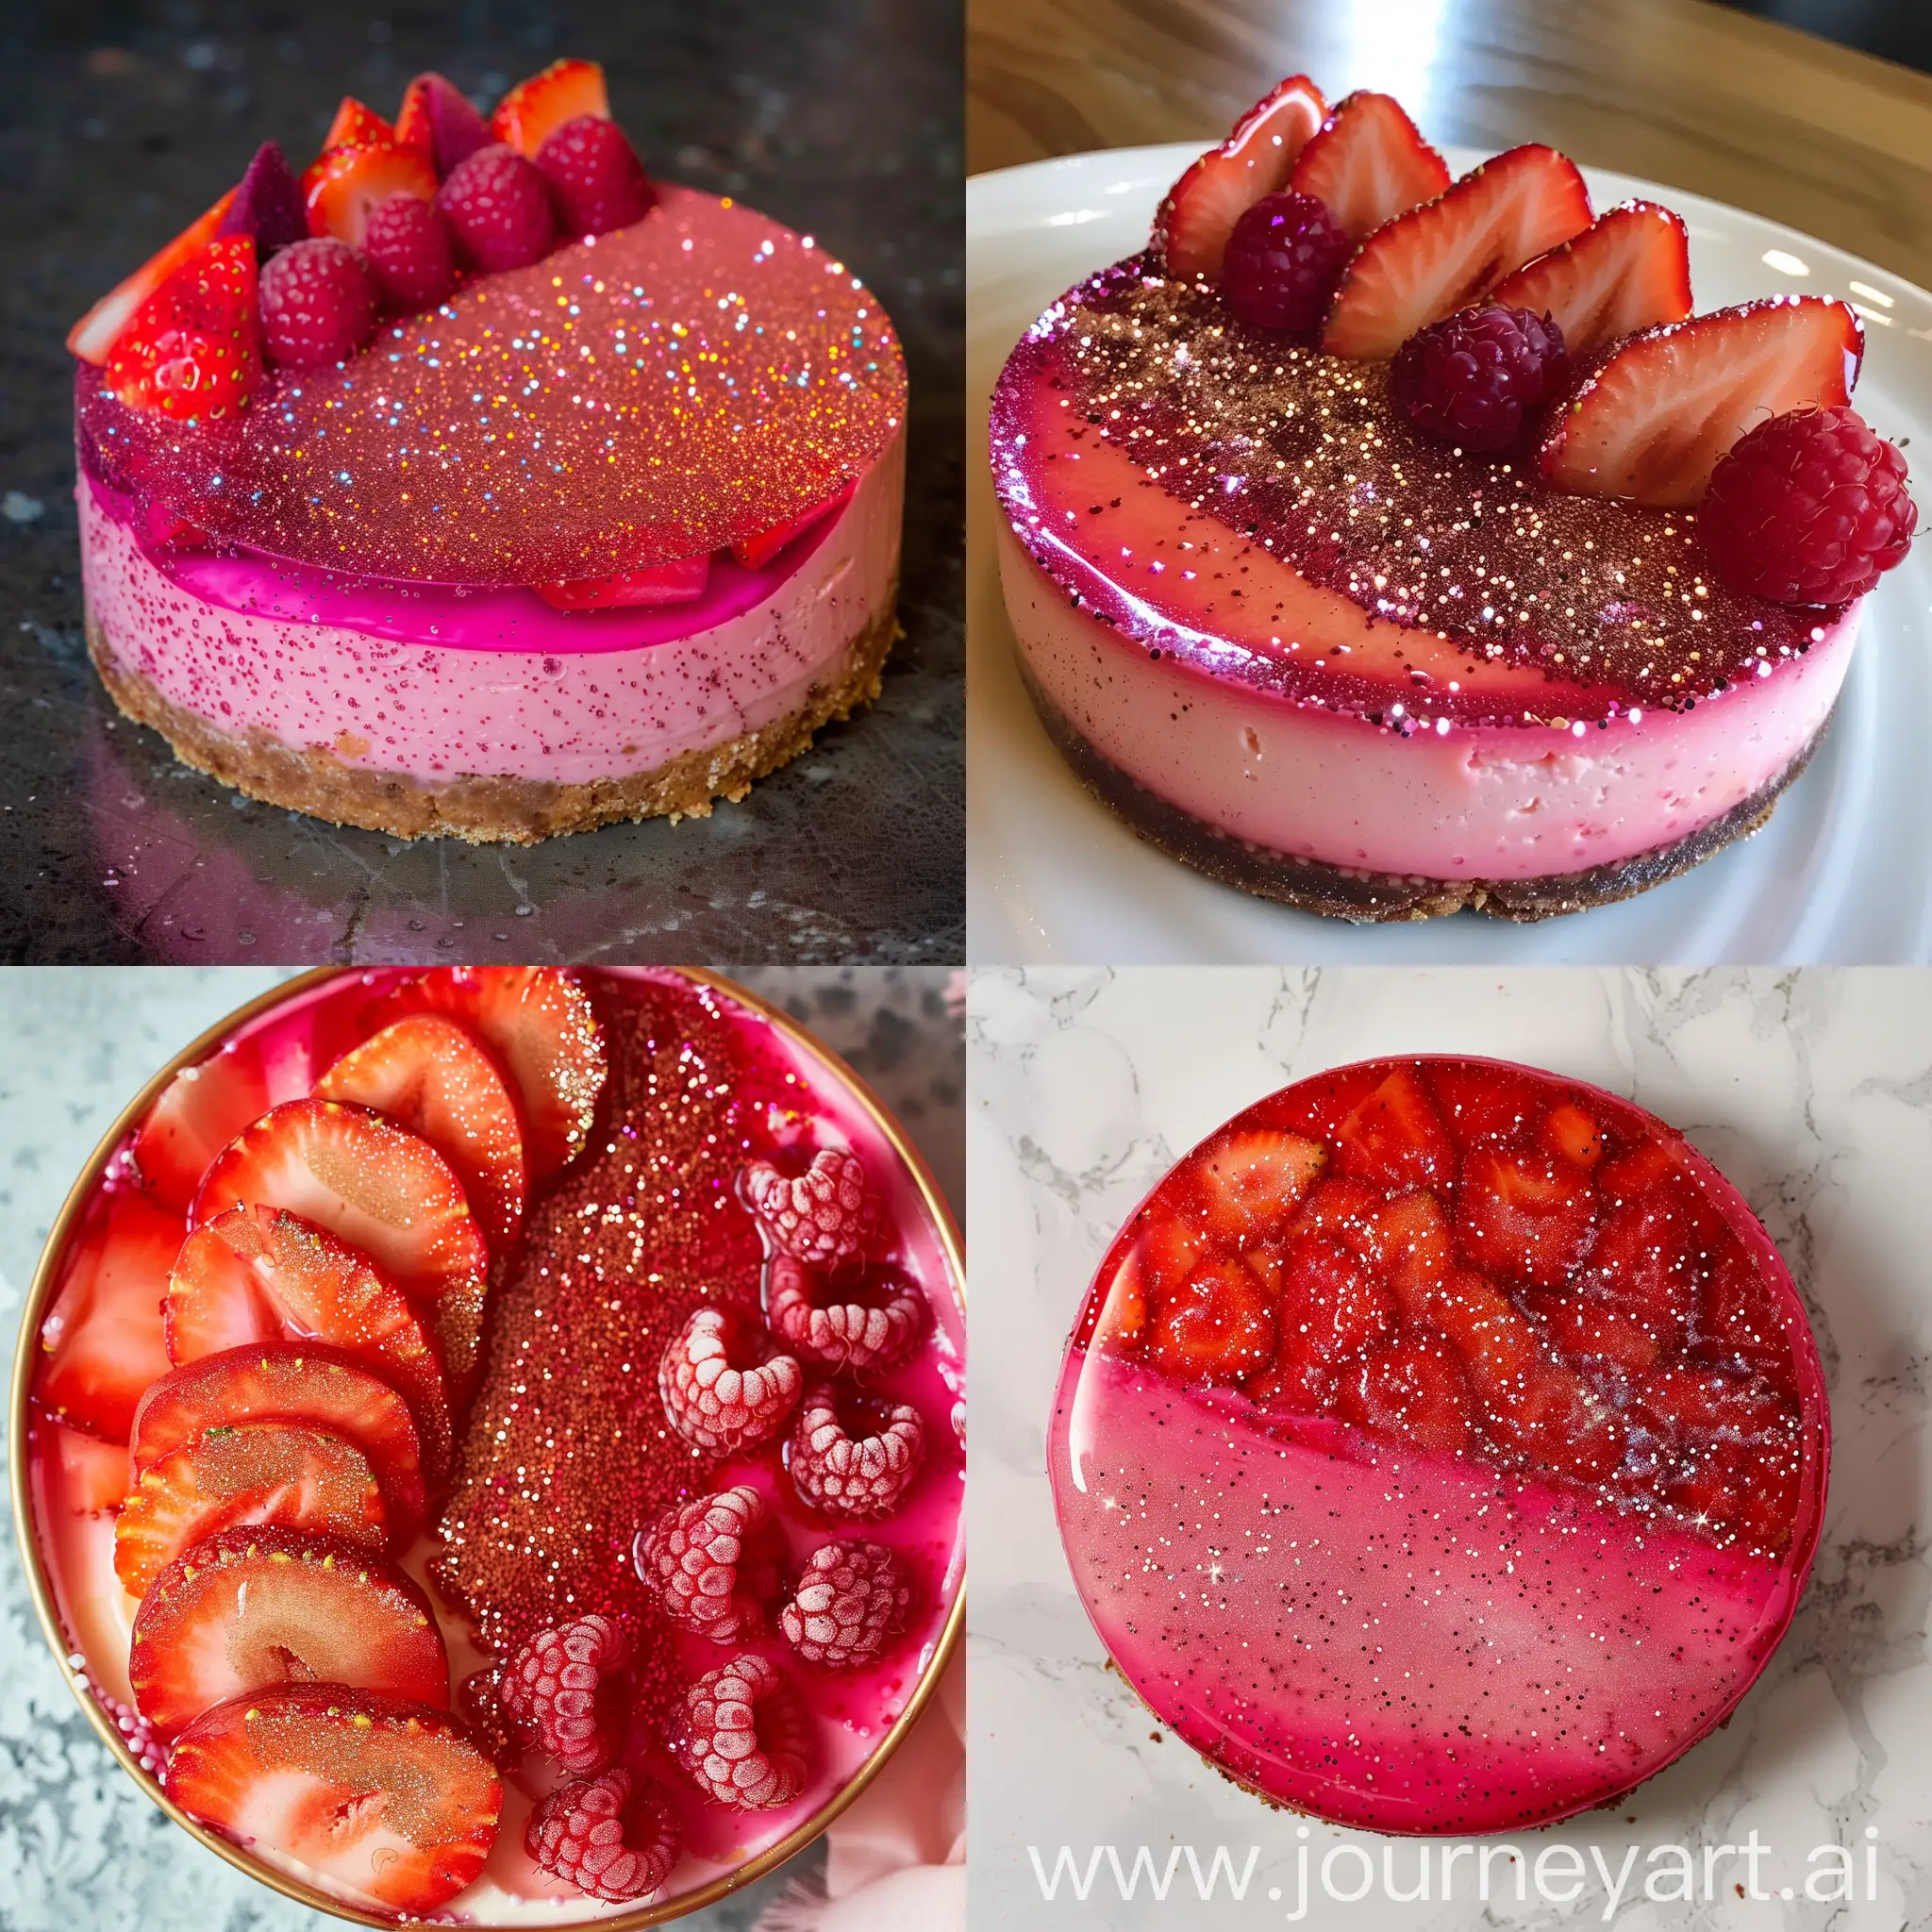 Passion fruit, strawberry and raspberry cheesecake create a transitional shade from red to pink, topped with edible glitter